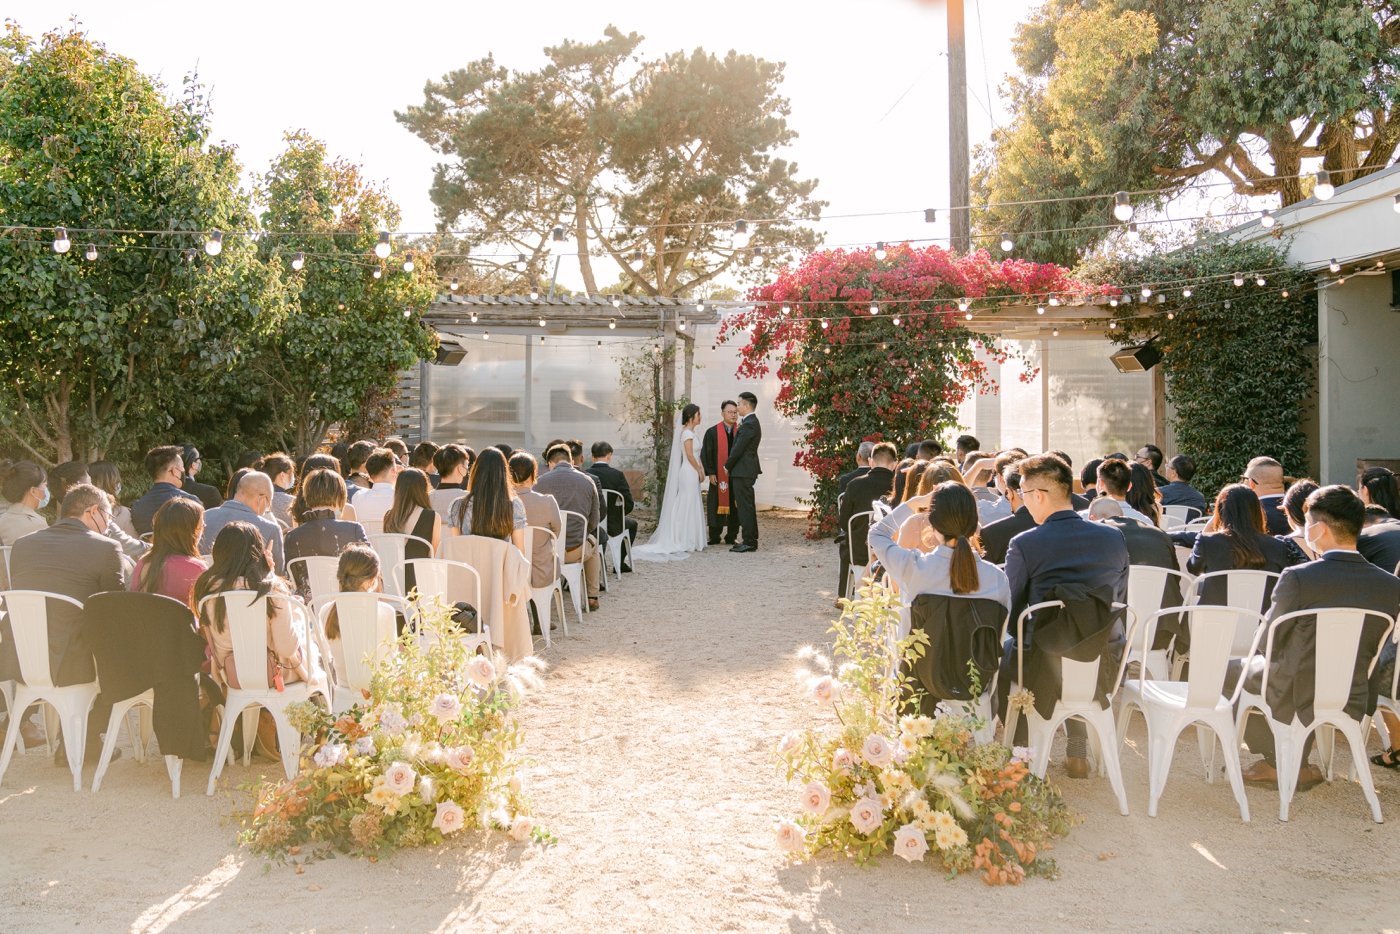 Wedding ceremony on the garden patio at Aracely Cafe